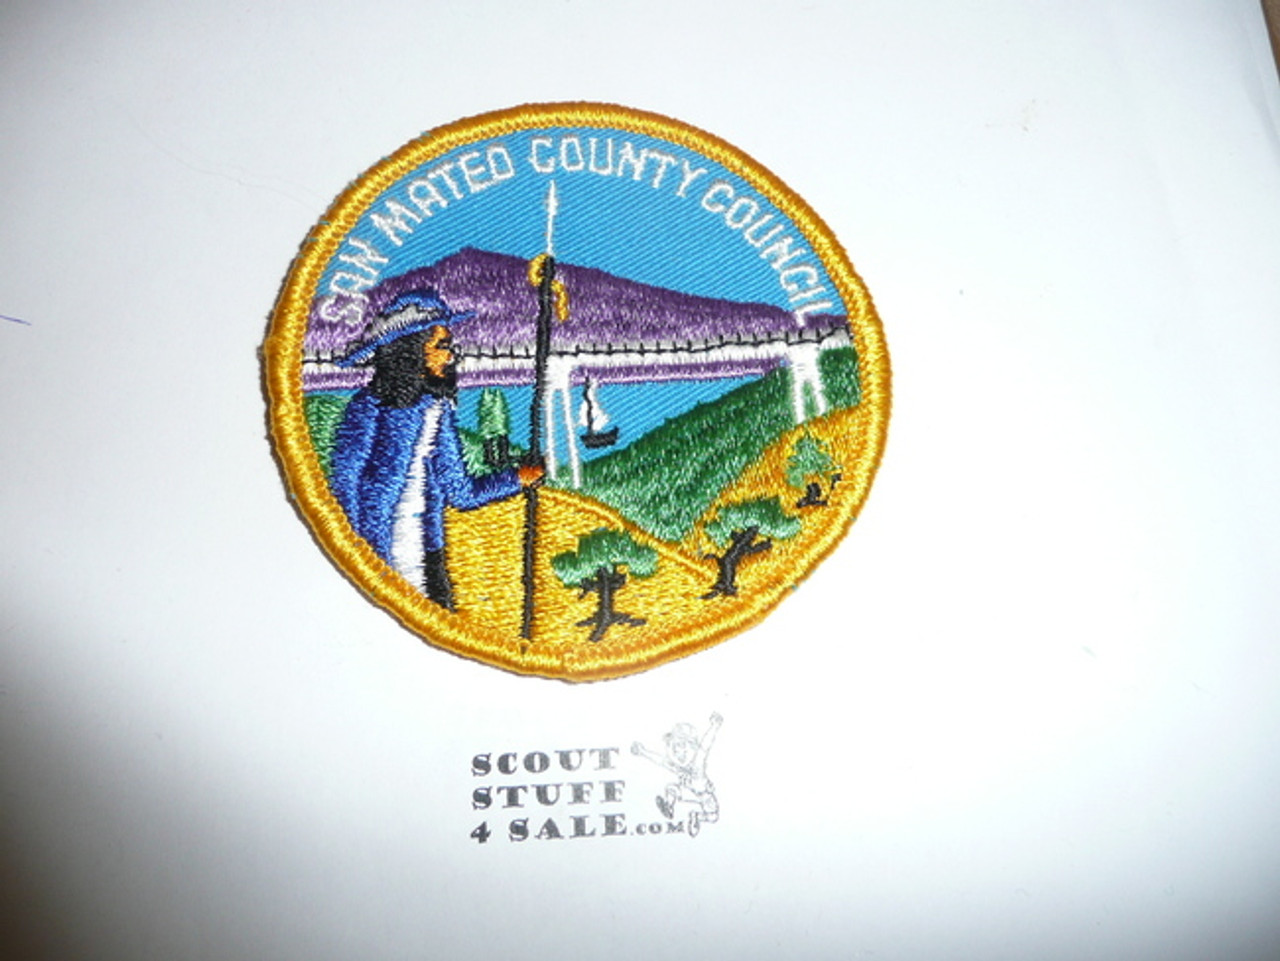 San Mateo County Council Patch (CP)